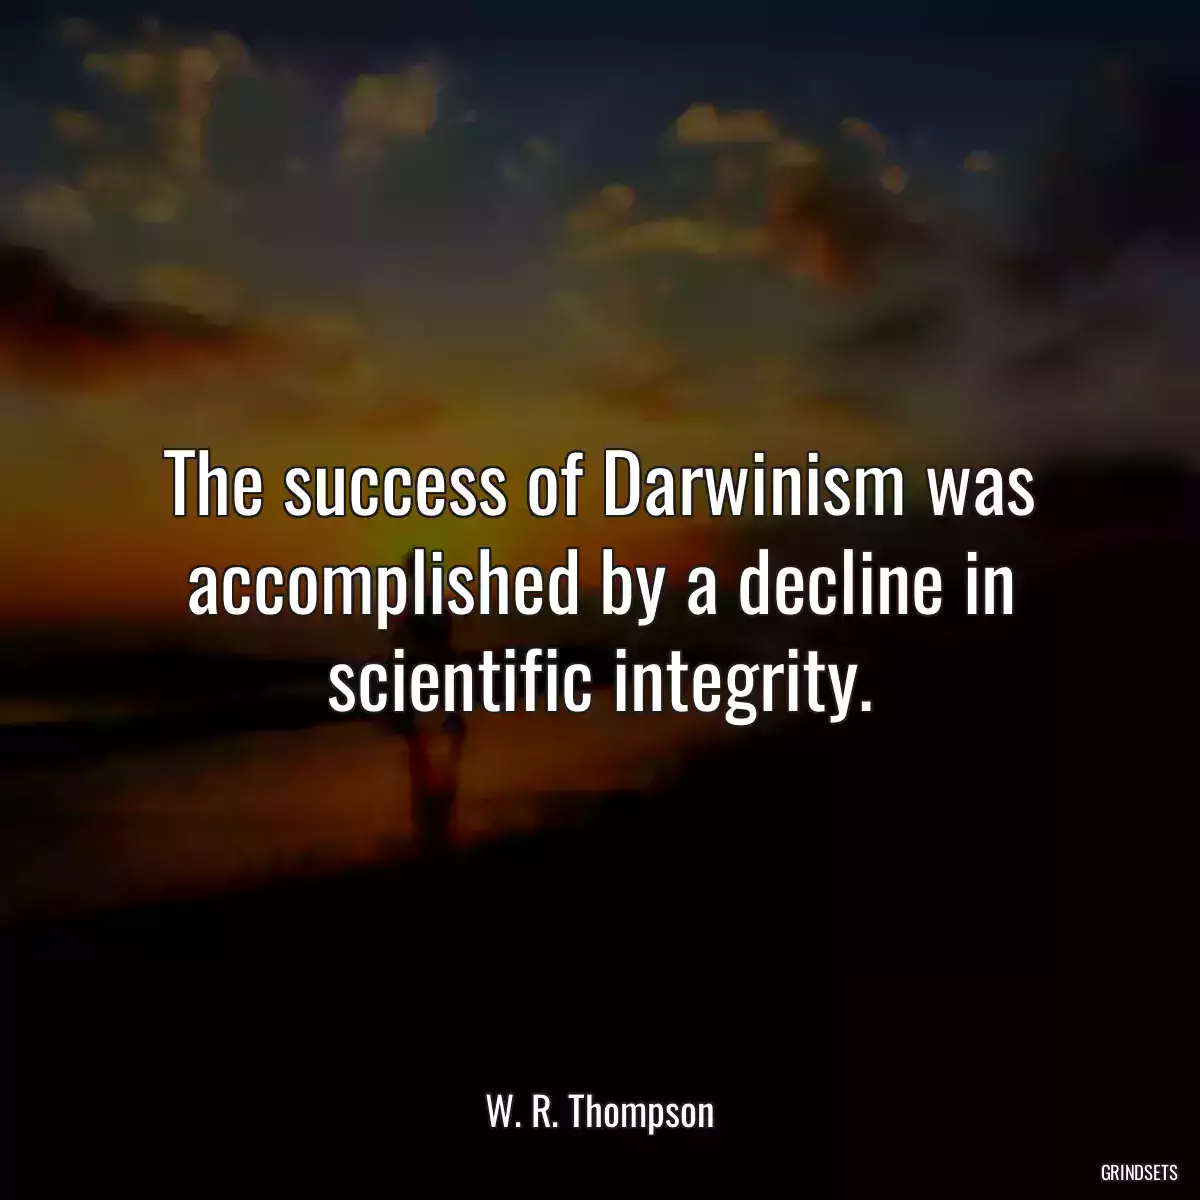 The success of Darwinism was accomplished by a decline in scientific integrity.